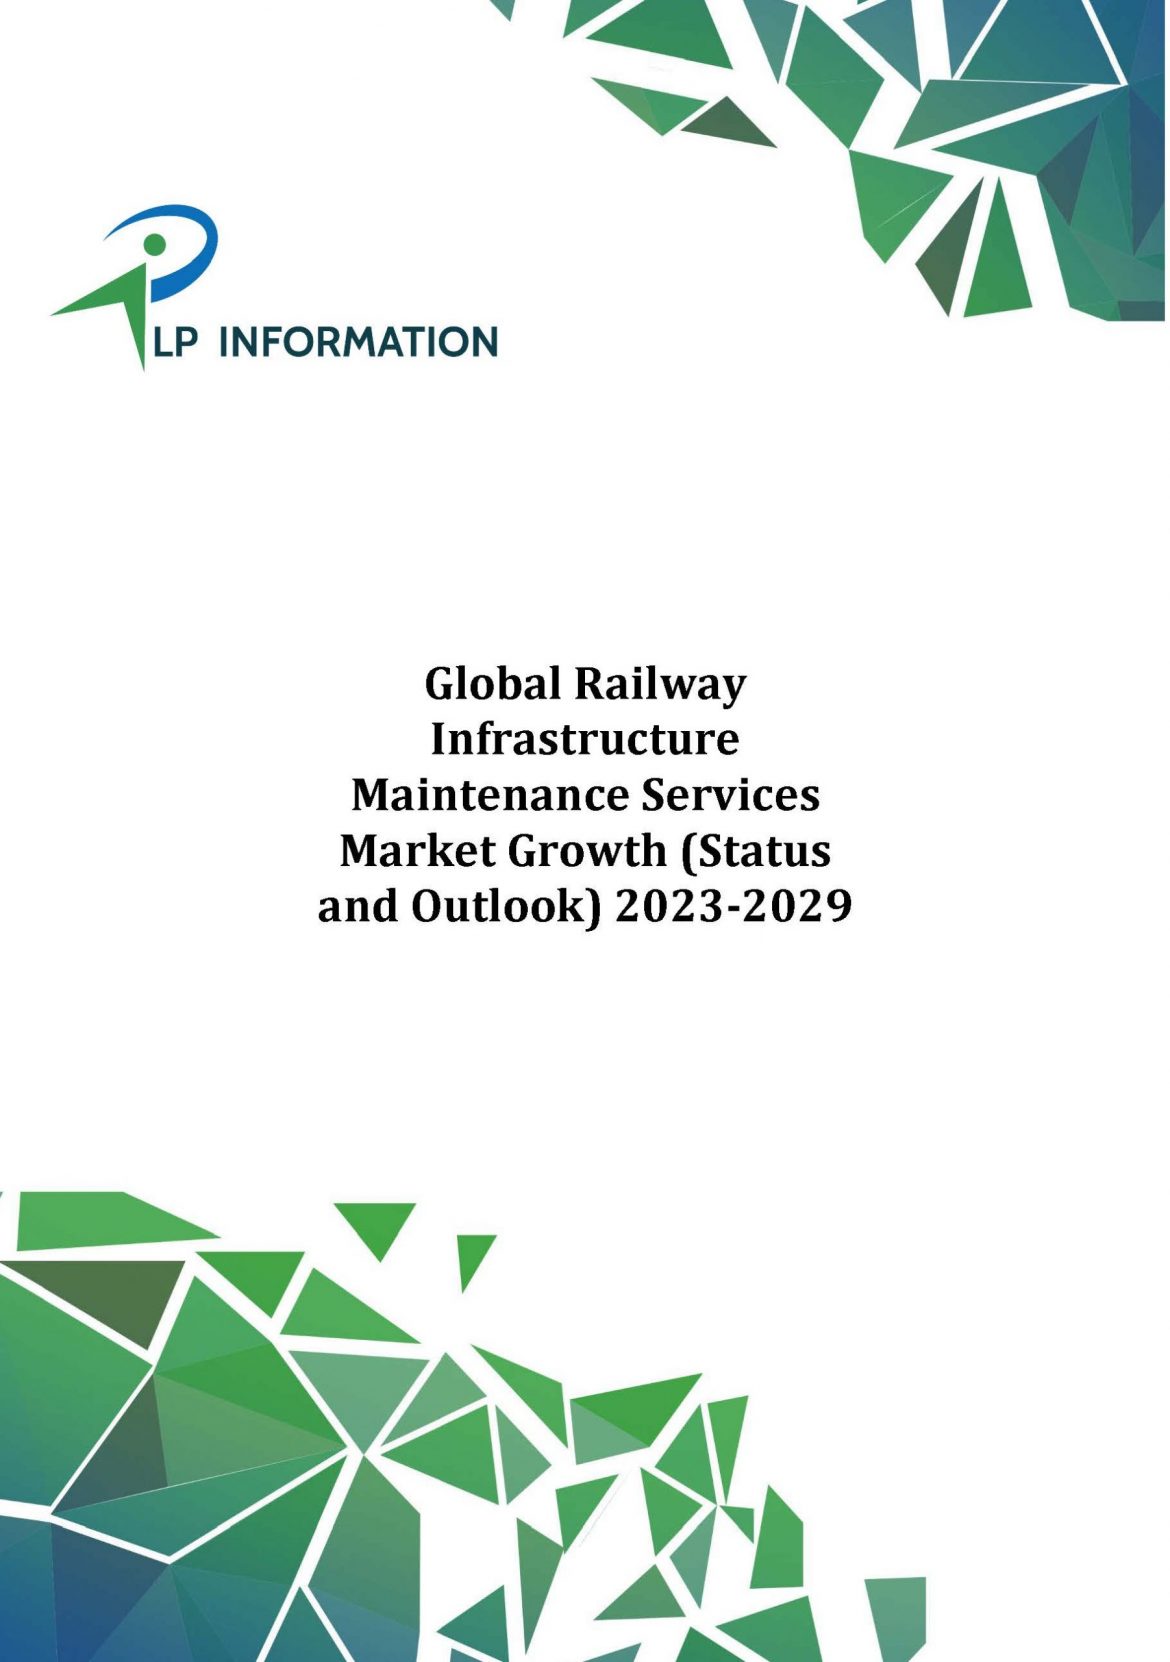 Global Railway Infrastructure Maintenance Services Market Growth (Status and Outlook) 2023-2029